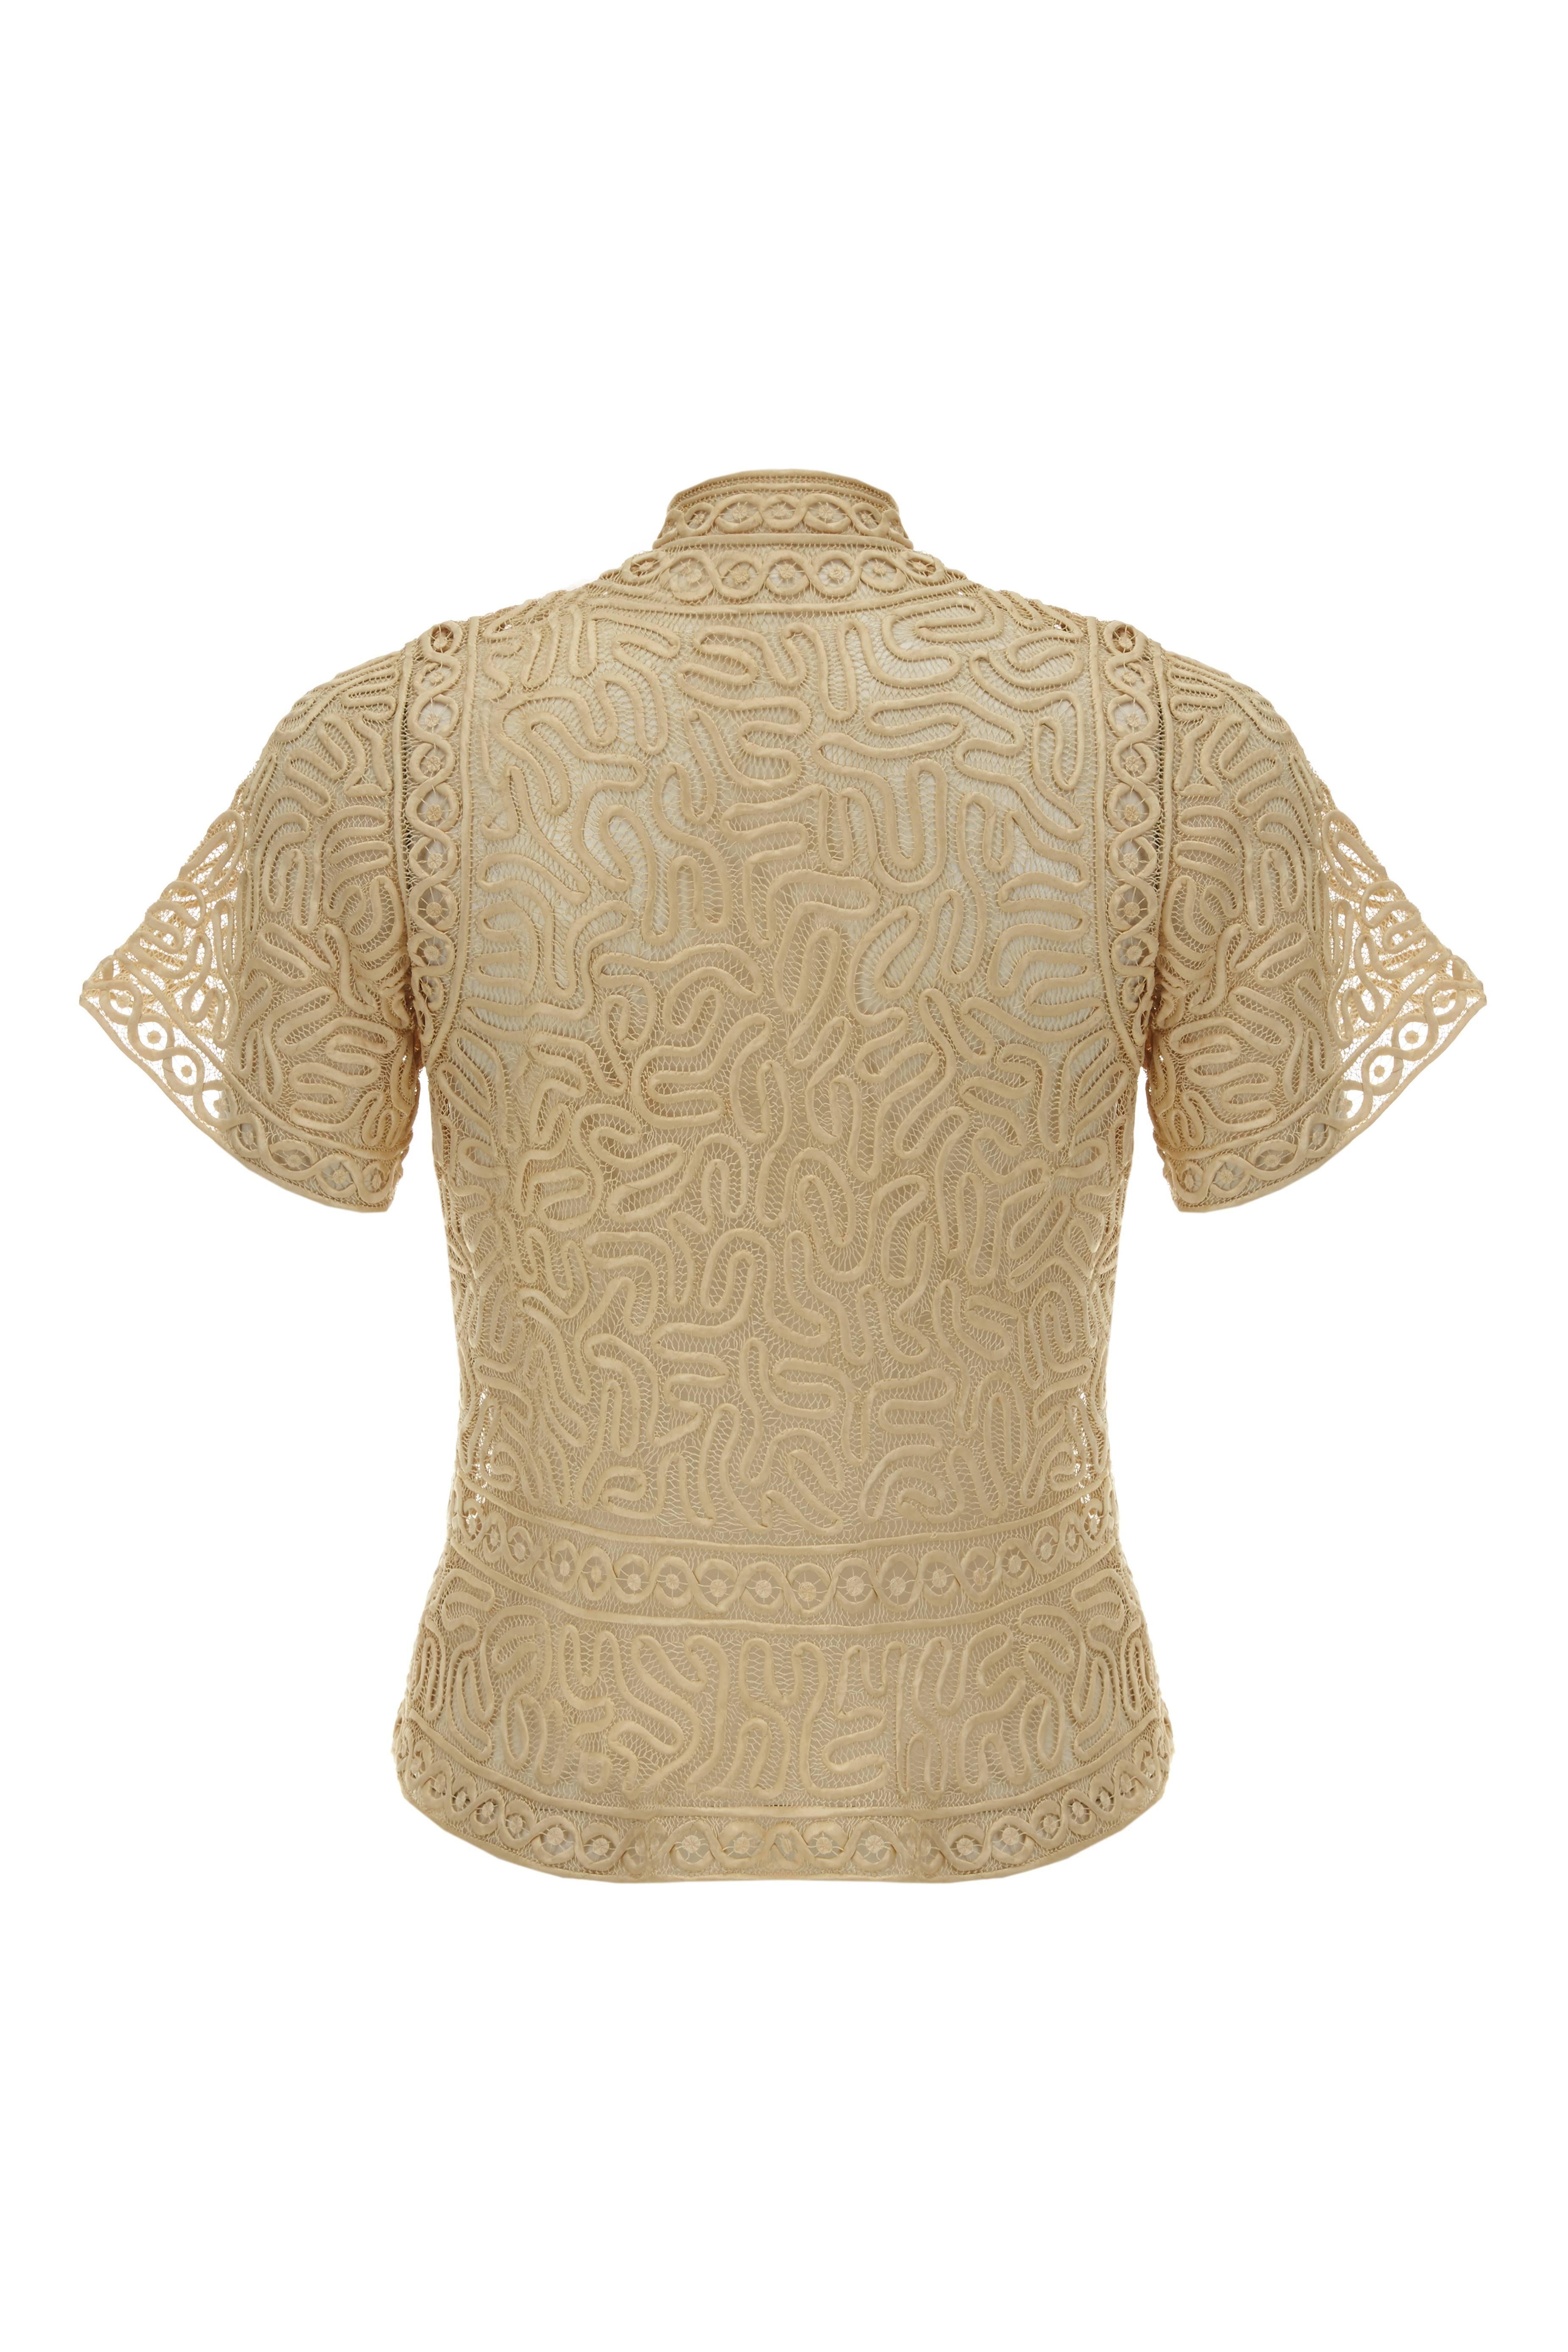 This is an exquisite tape lace blouse from the late 1920s/ early 1930s in handmade taupe silk lace with swirling ribbon and oriental style toggles to fasten down the front. It also features a mandarin collar and is in excellent condition with no